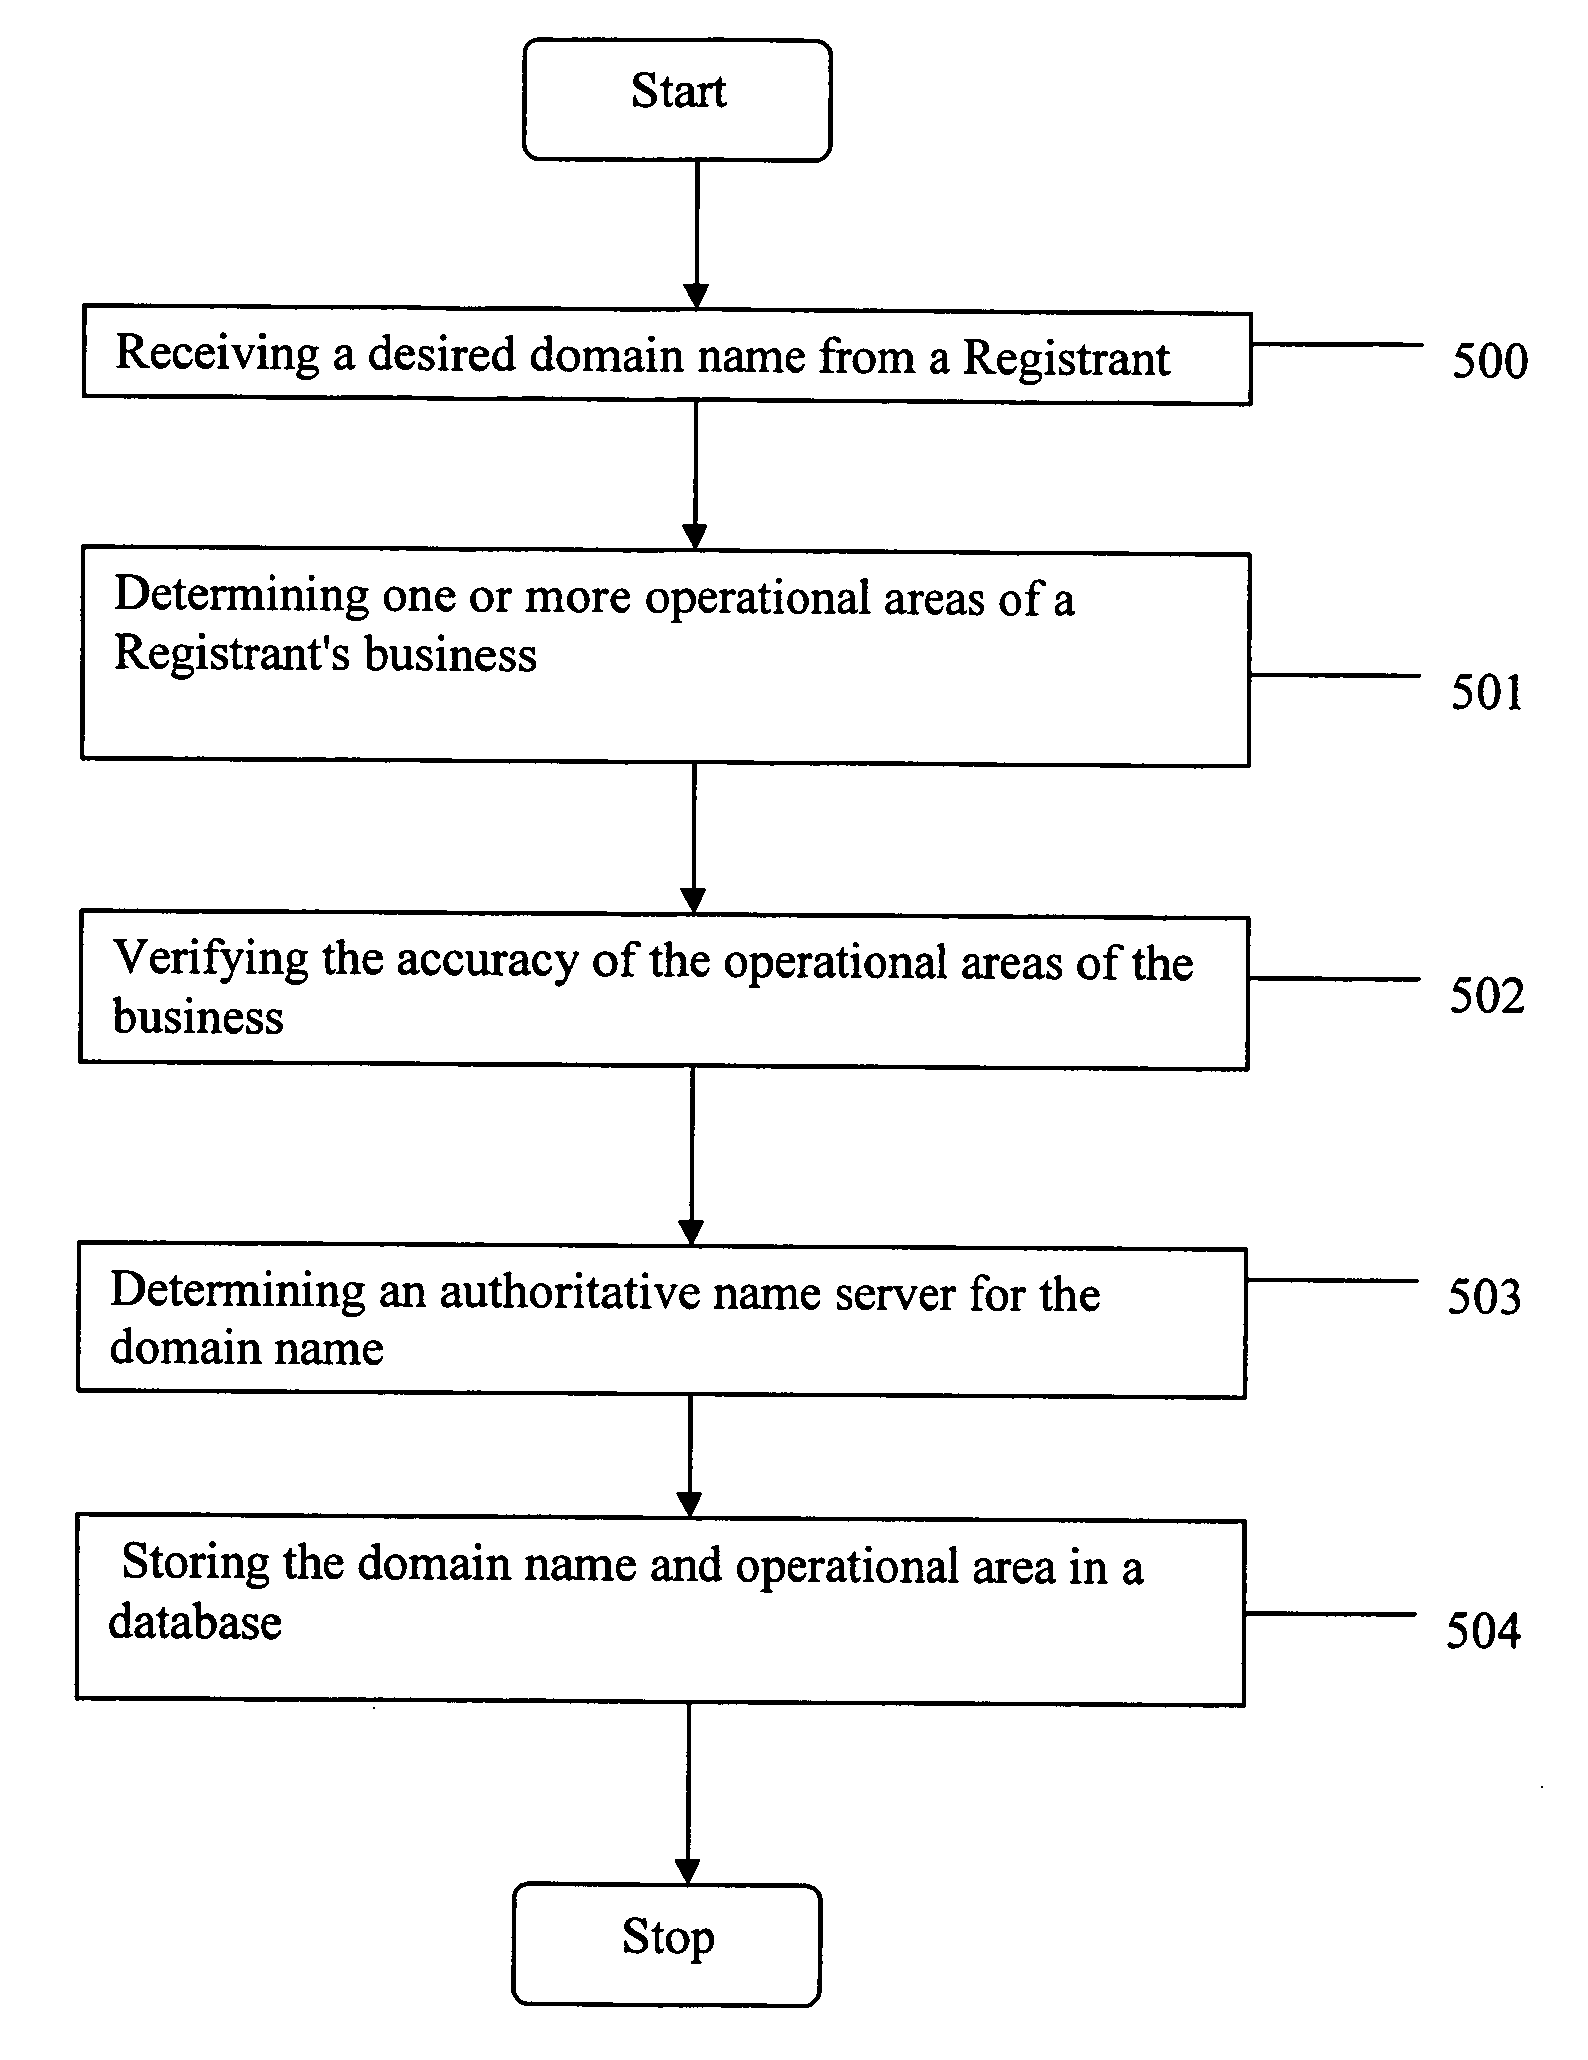 Creation of a database storing domain names and business operational areas